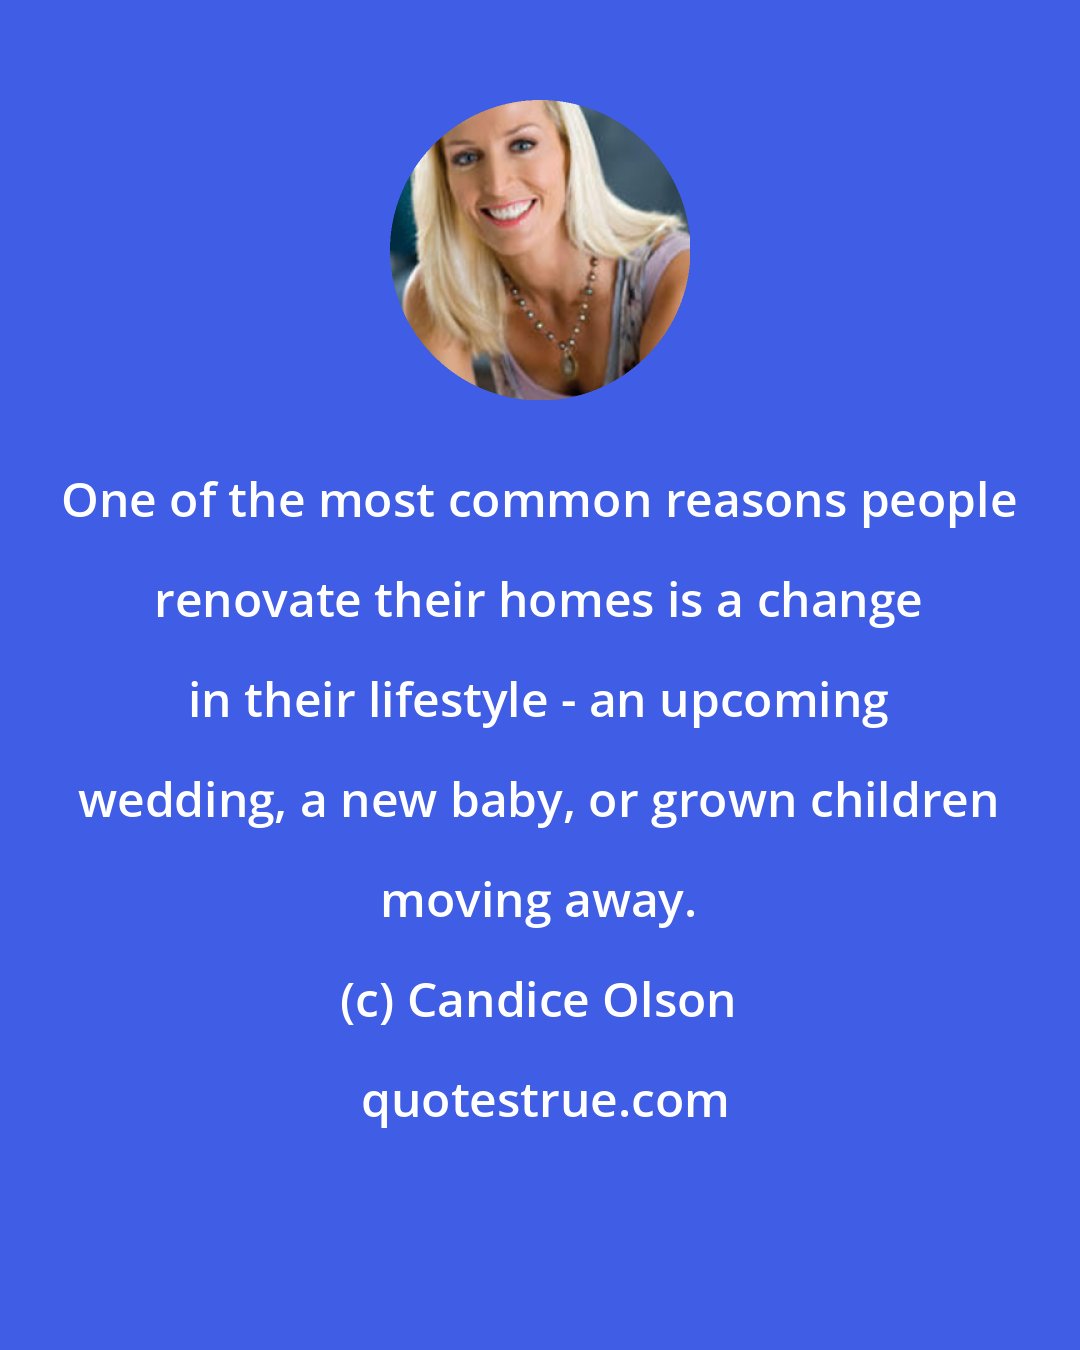 Candice Olson: One of the most common reasons people renovate their homes is a change in their lifestyle - an upcoming wedding, a new baby, or grown children moving away.